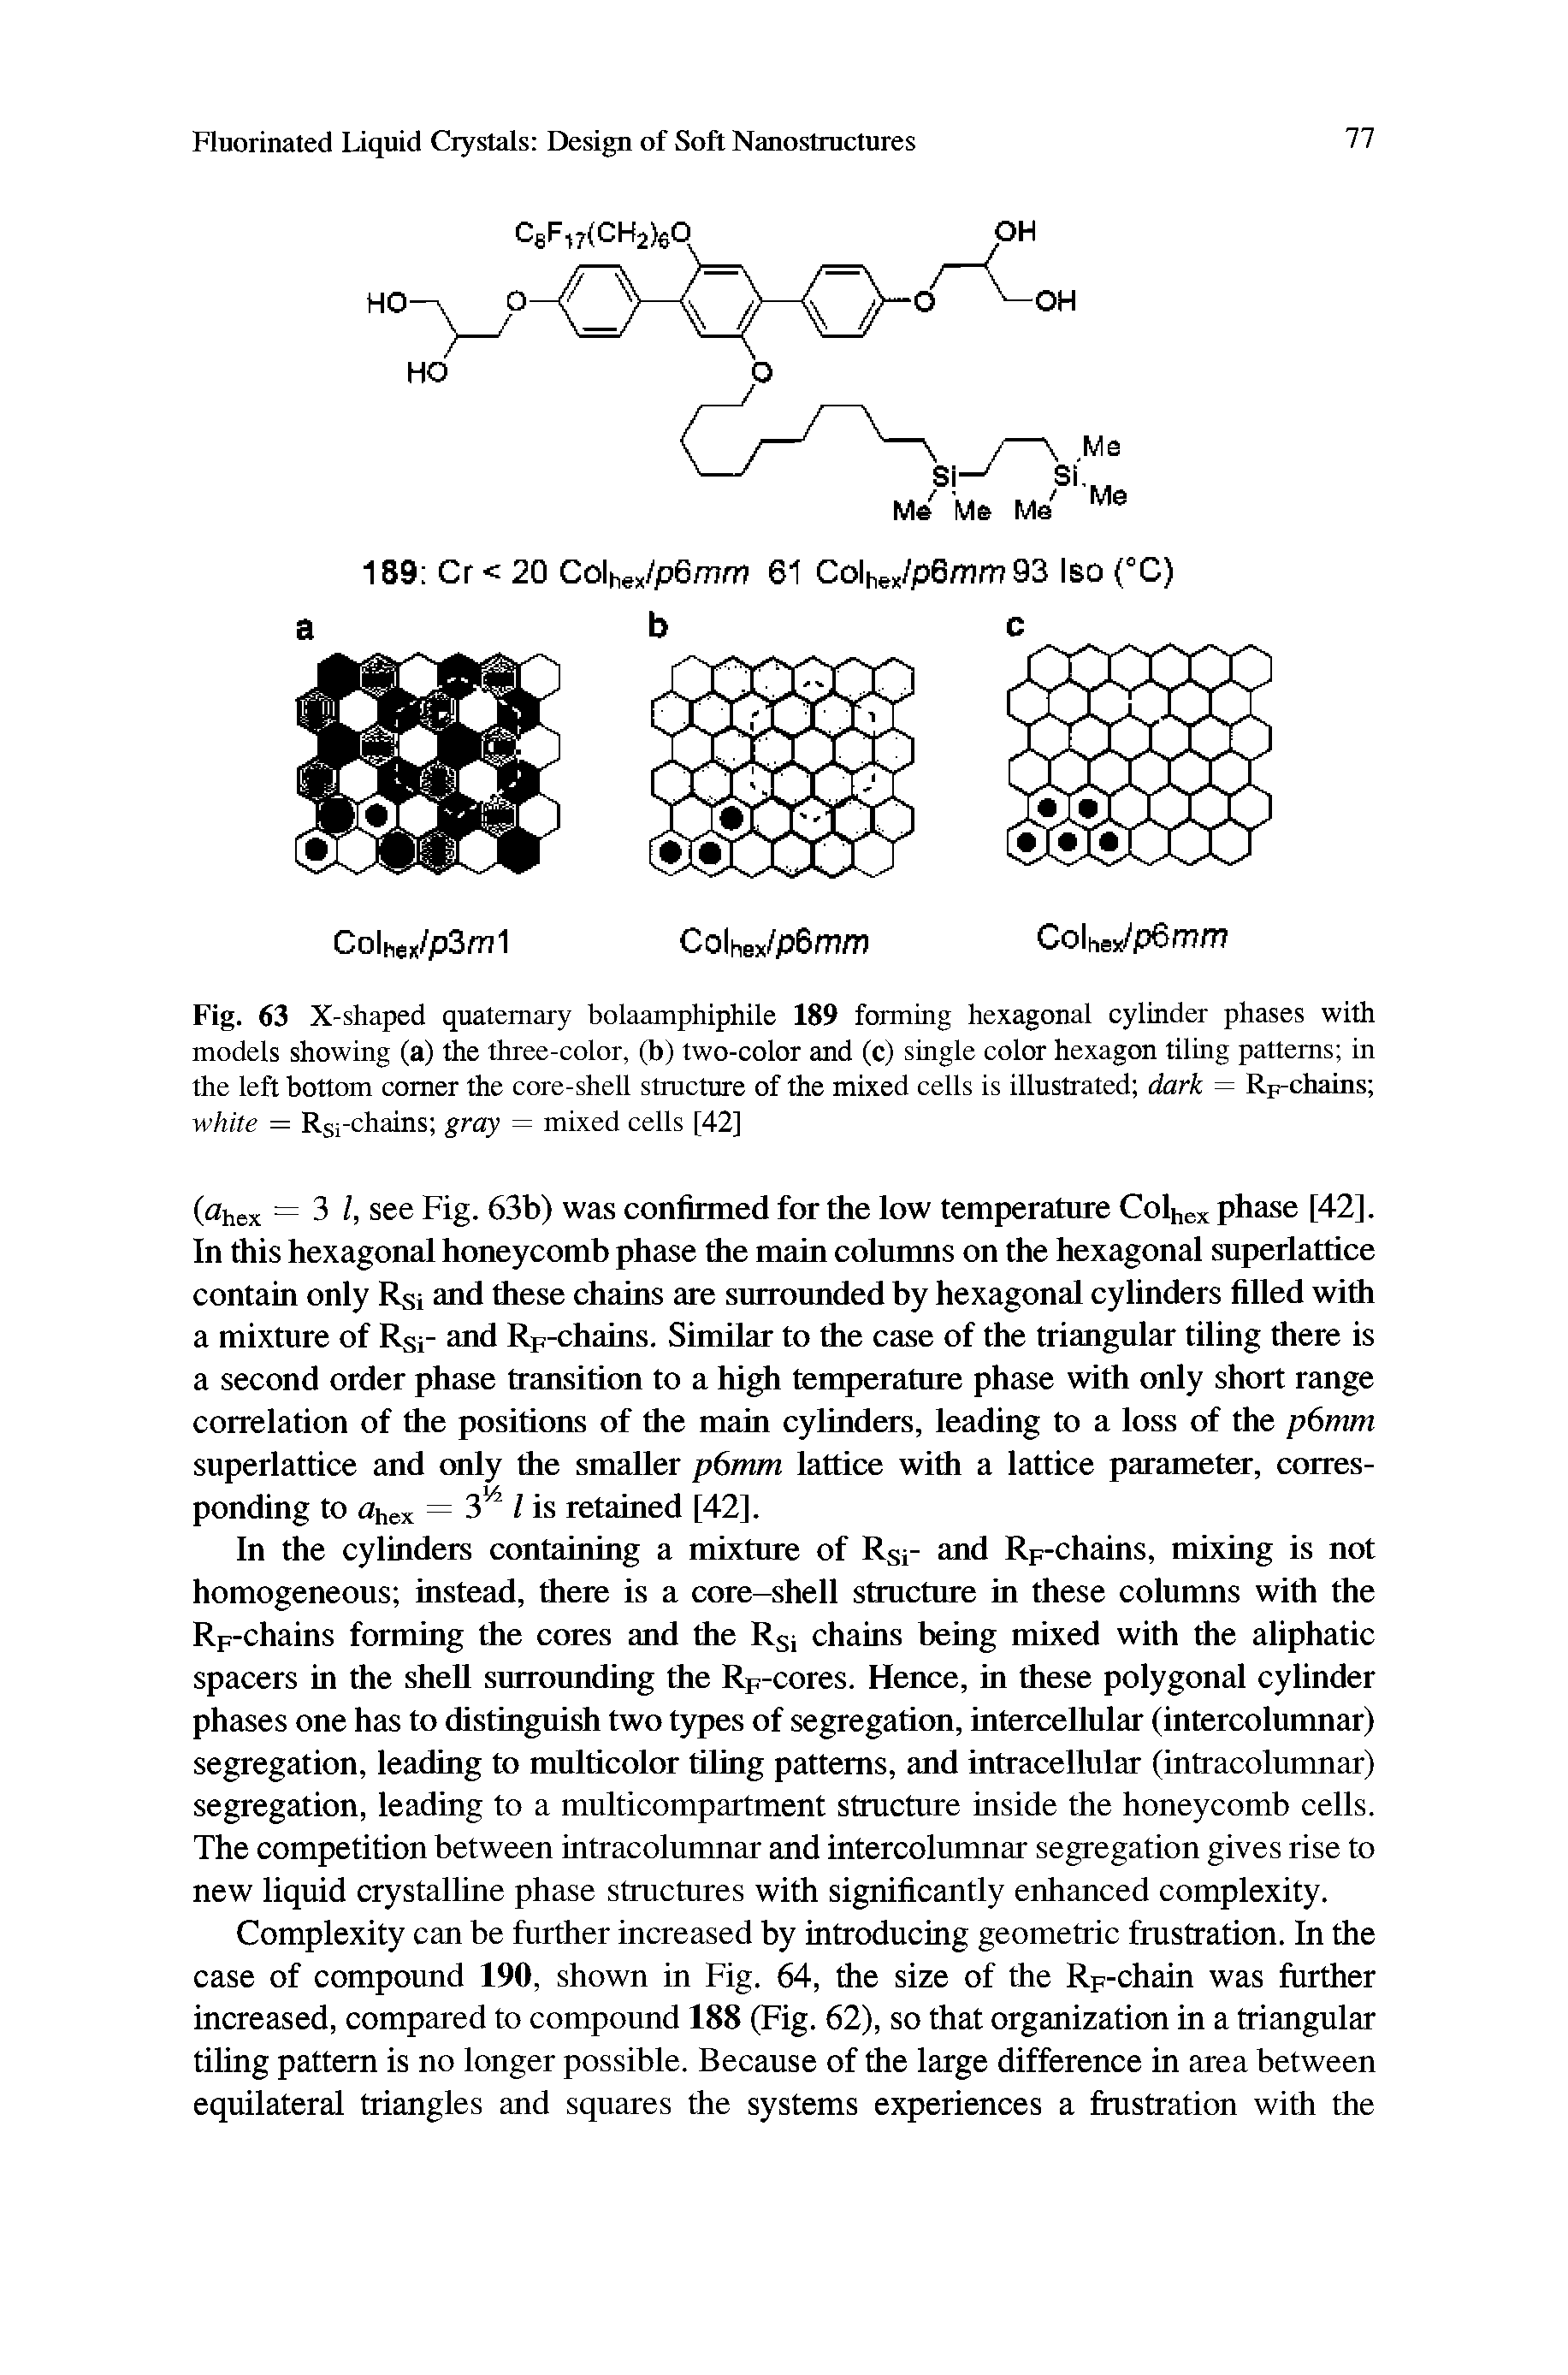 Fig. 63 X-shaped quaternary bolaamphiphile 189 forming hexagonal cylinder phases with models showing (a) the three-color, (b) two-color and (c) single color hexagon tiling patterns in the left bottom comer the core-shell structure of the mixed cells is illustrated dark = Rp-chains white = Rsi-chains gray = mixed cells [42]...